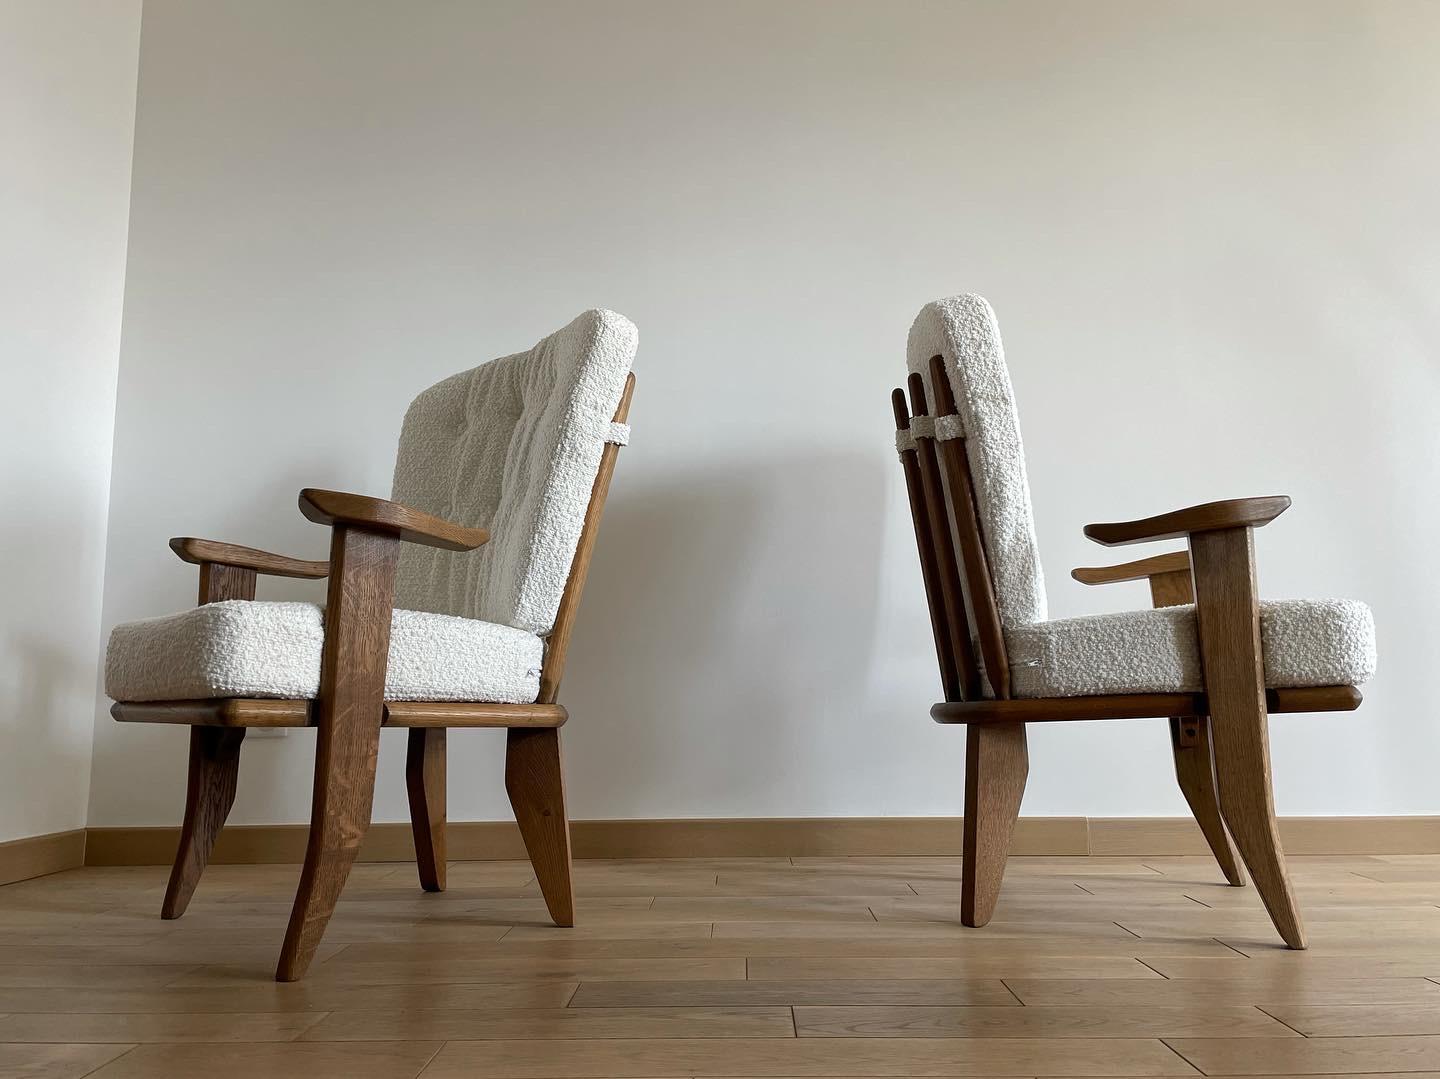 Pair of armchairs by guillerme et chambron from the 1960s. Structure in solid oak and cushions in white terry fabric. The entire structure has been restored and the cushions are completely new and made by a professional.
Dimensions : W75 x D70 x